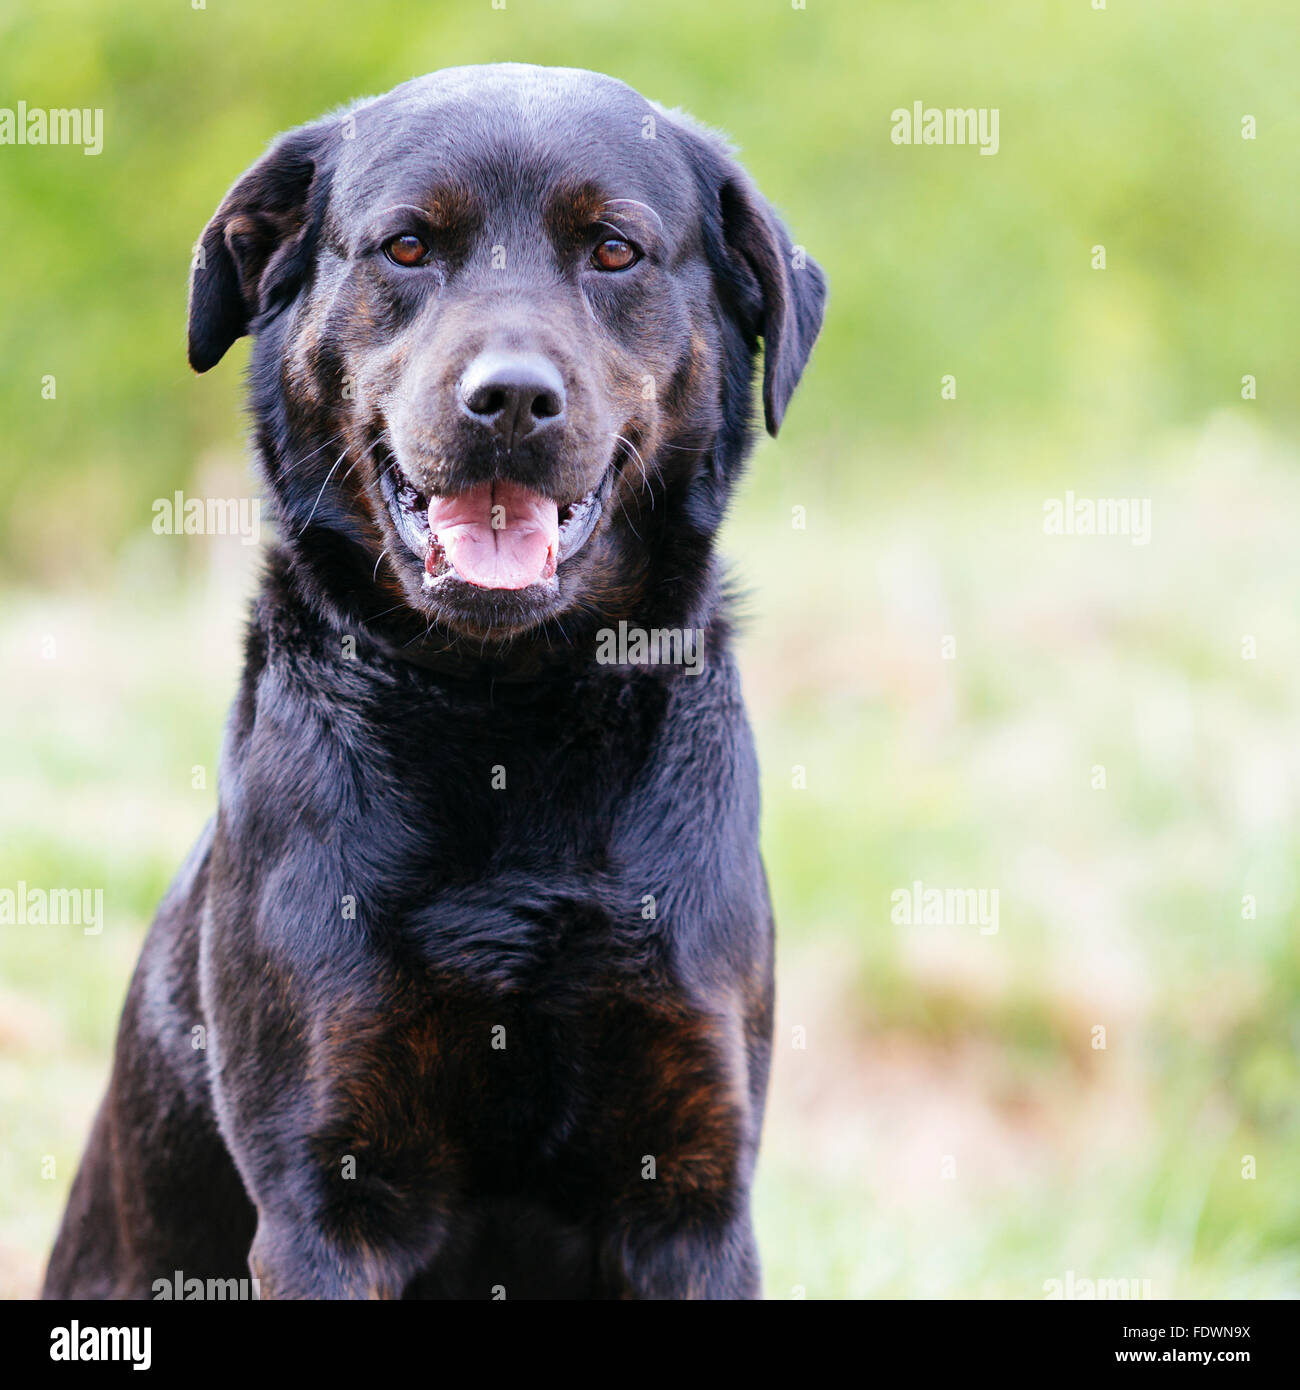 Black Rottweiler Labrador mixed breed dog outdoor portrait.  Model Release: No.  Property Release: Yes (dog). Stock Photo